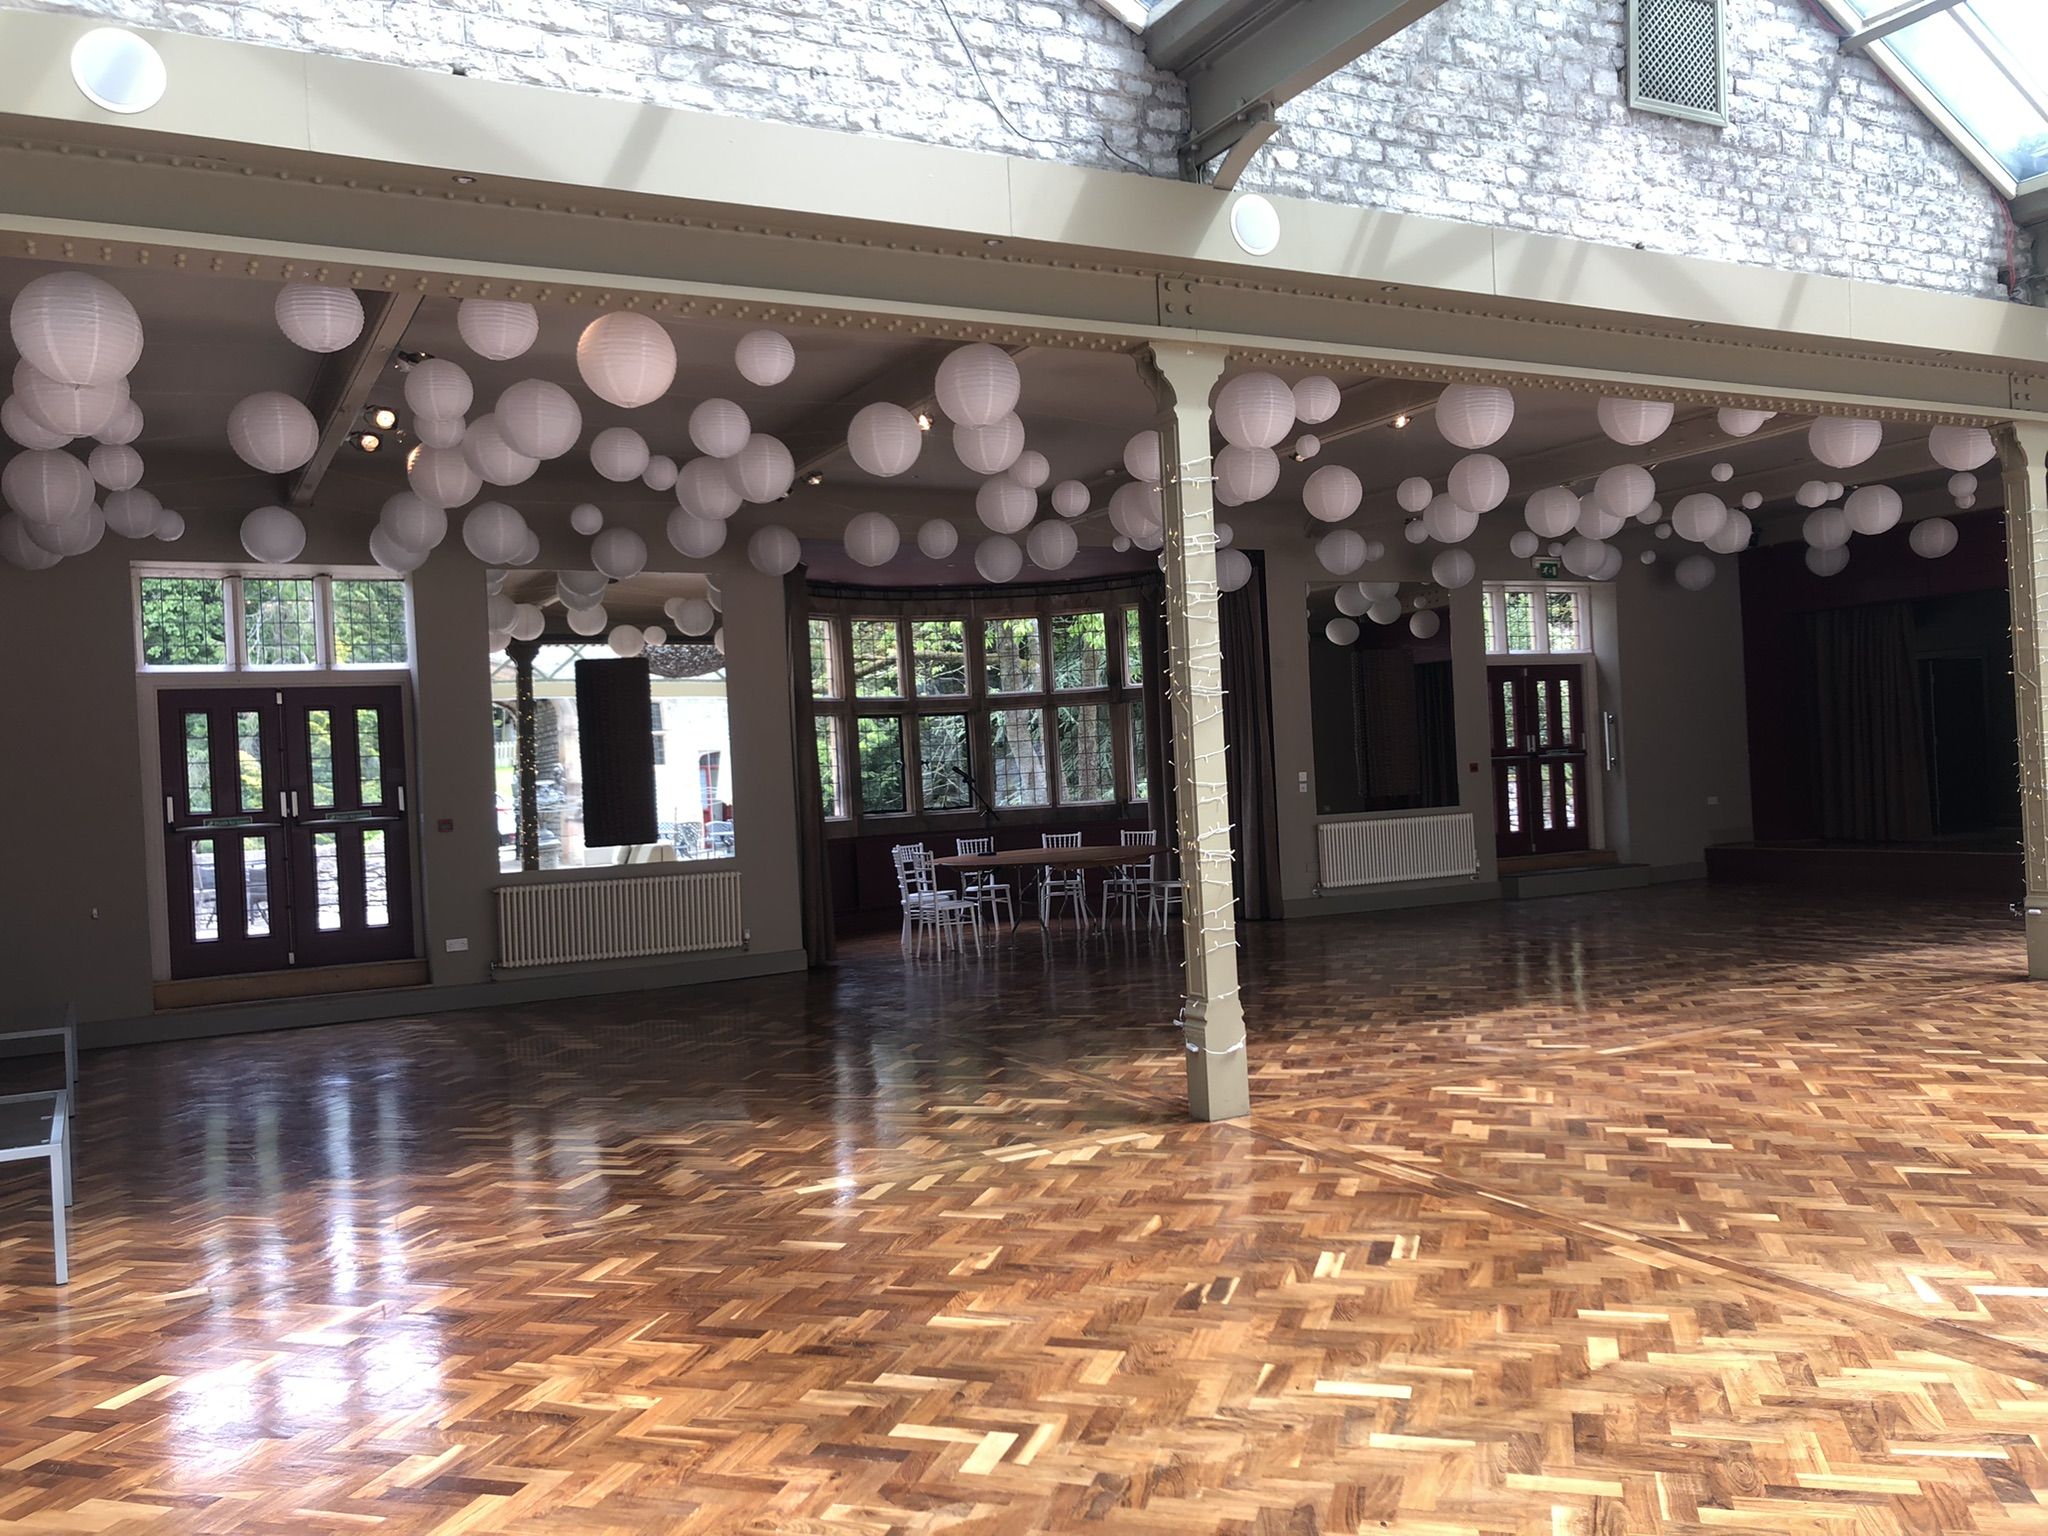 a large room with a lot of balloons hanging from the ceiling.